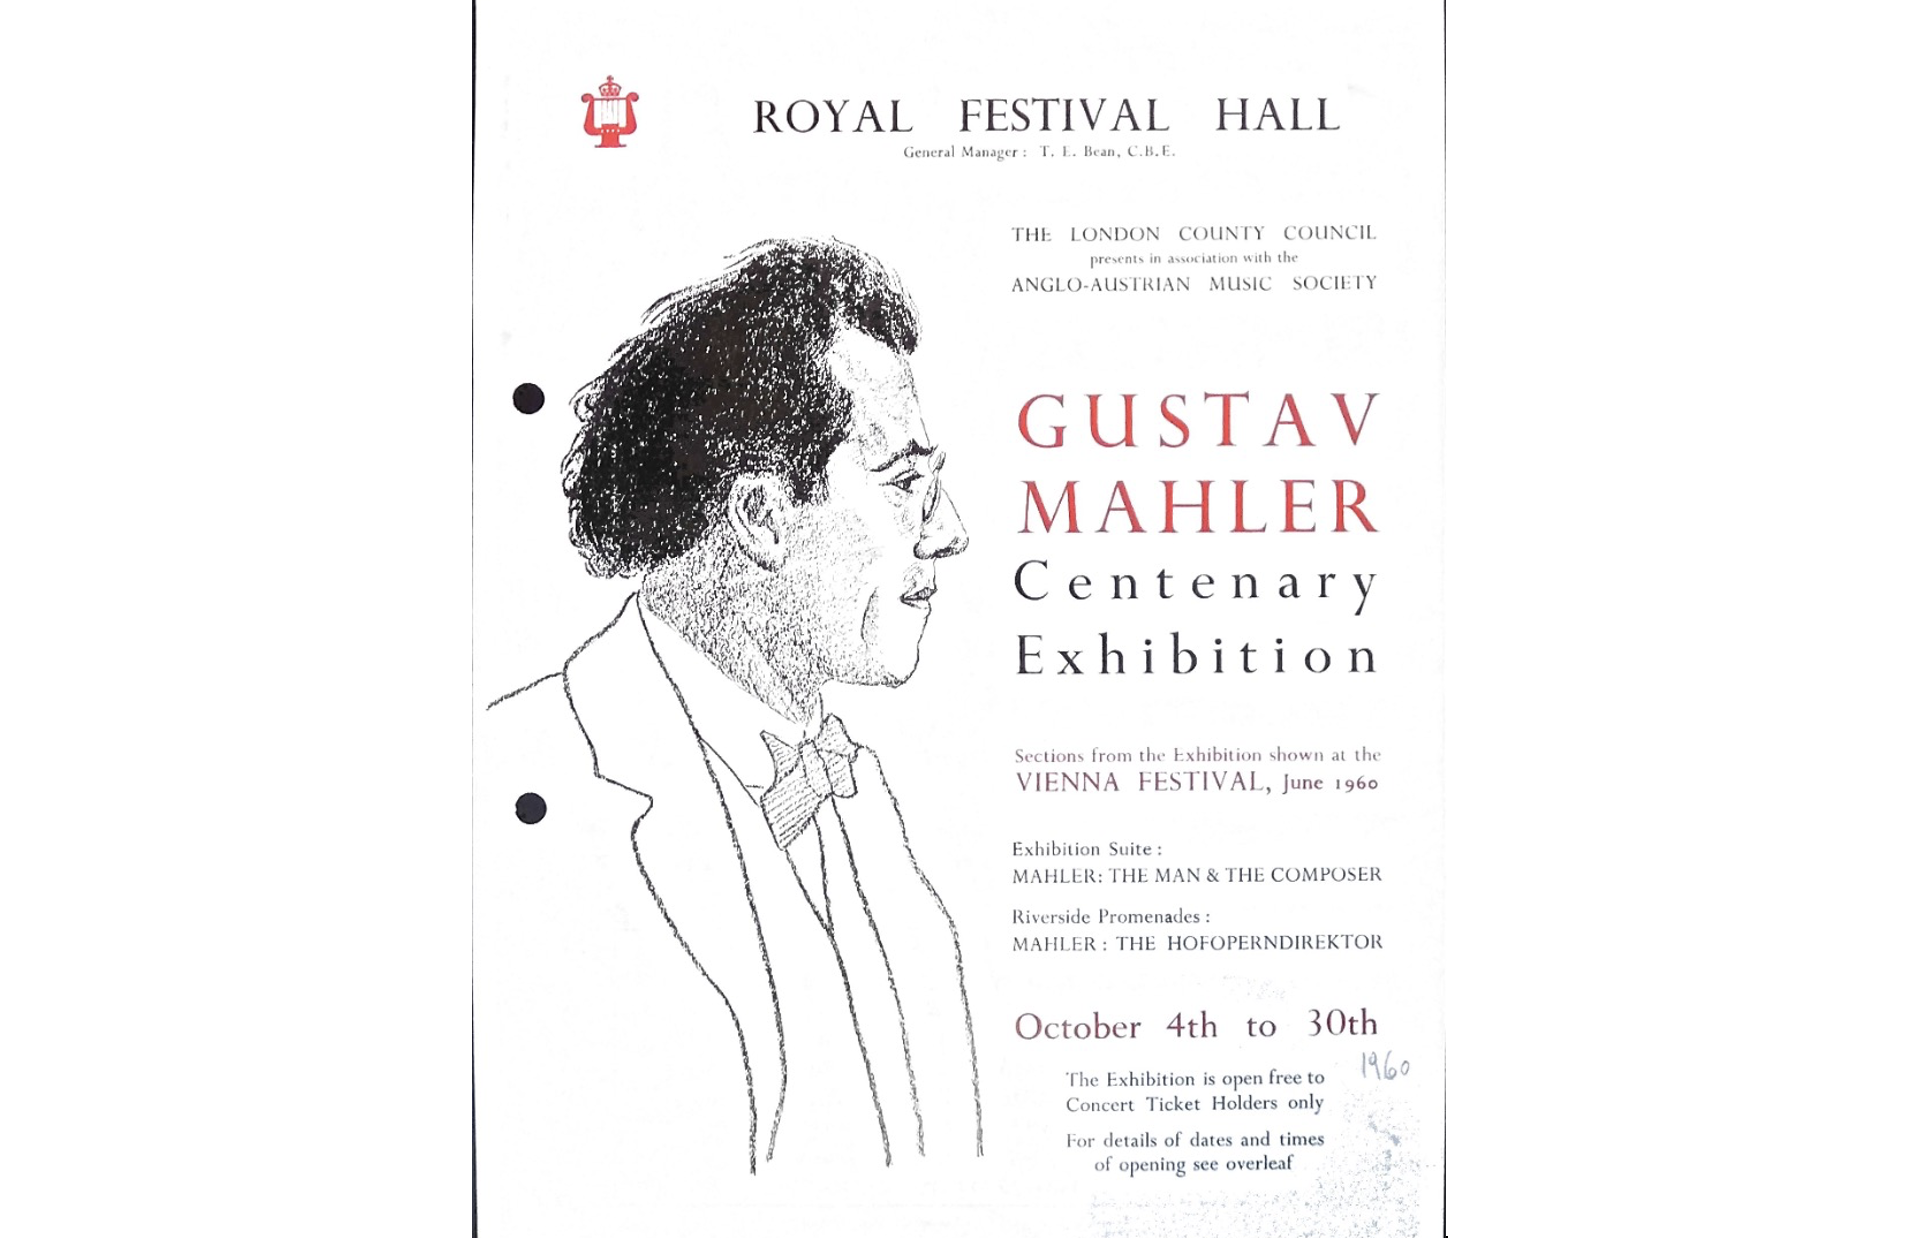 Poster announcing the Gustav Mahler Centenary Exhibition, held at the Royal Festival Hall, 4-30 October 1960 